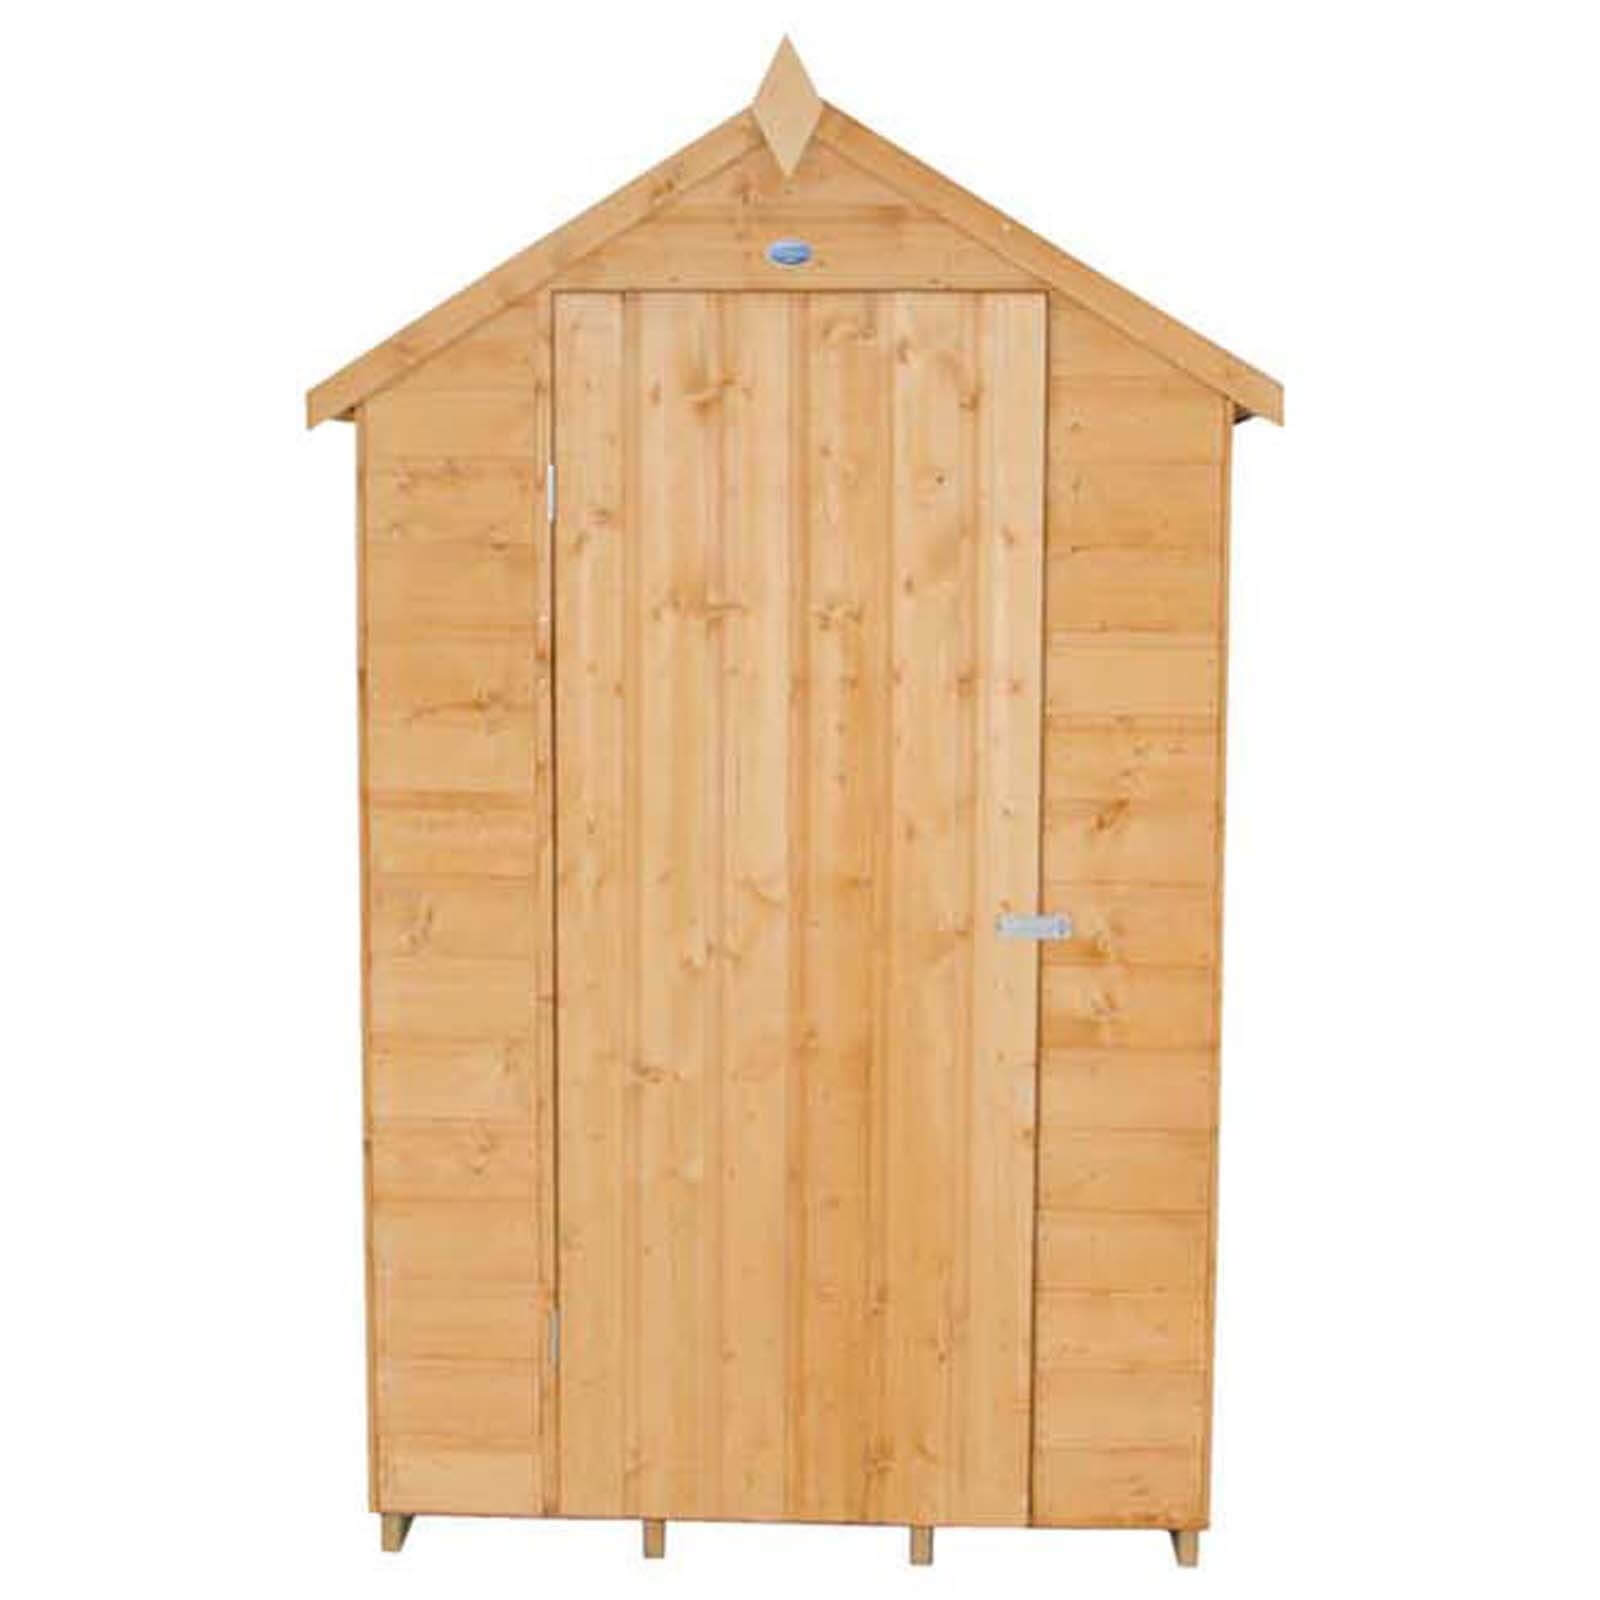 6x4ft Forest Wooden Shiplap Dip Treated Apex Shed -incl. Installation